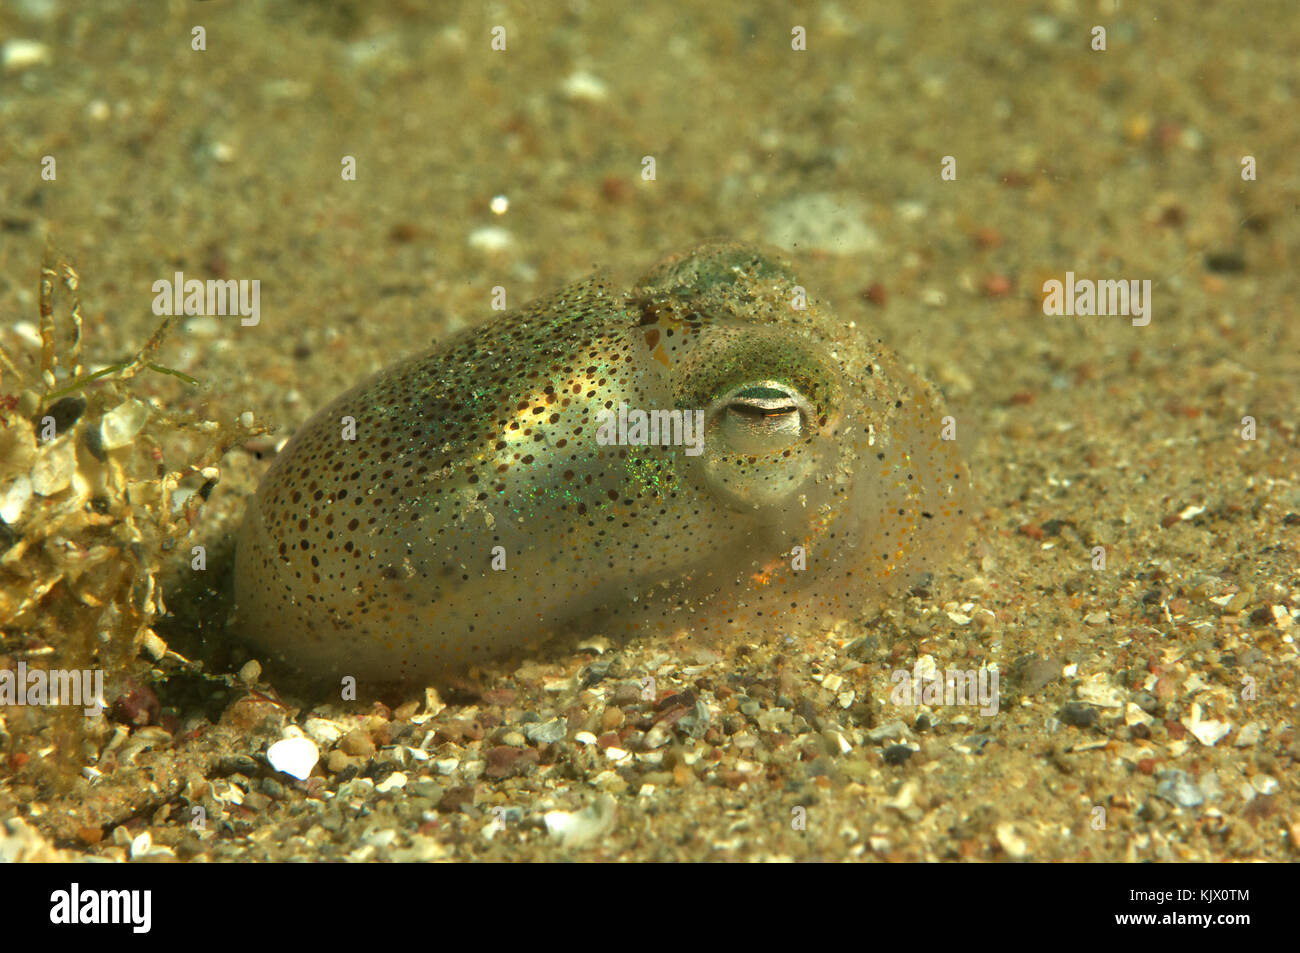 Bobtail squid also known as little cuttlefish  the smallest species of cephalopods reach a maximum of 5cm in length. Stock Photo